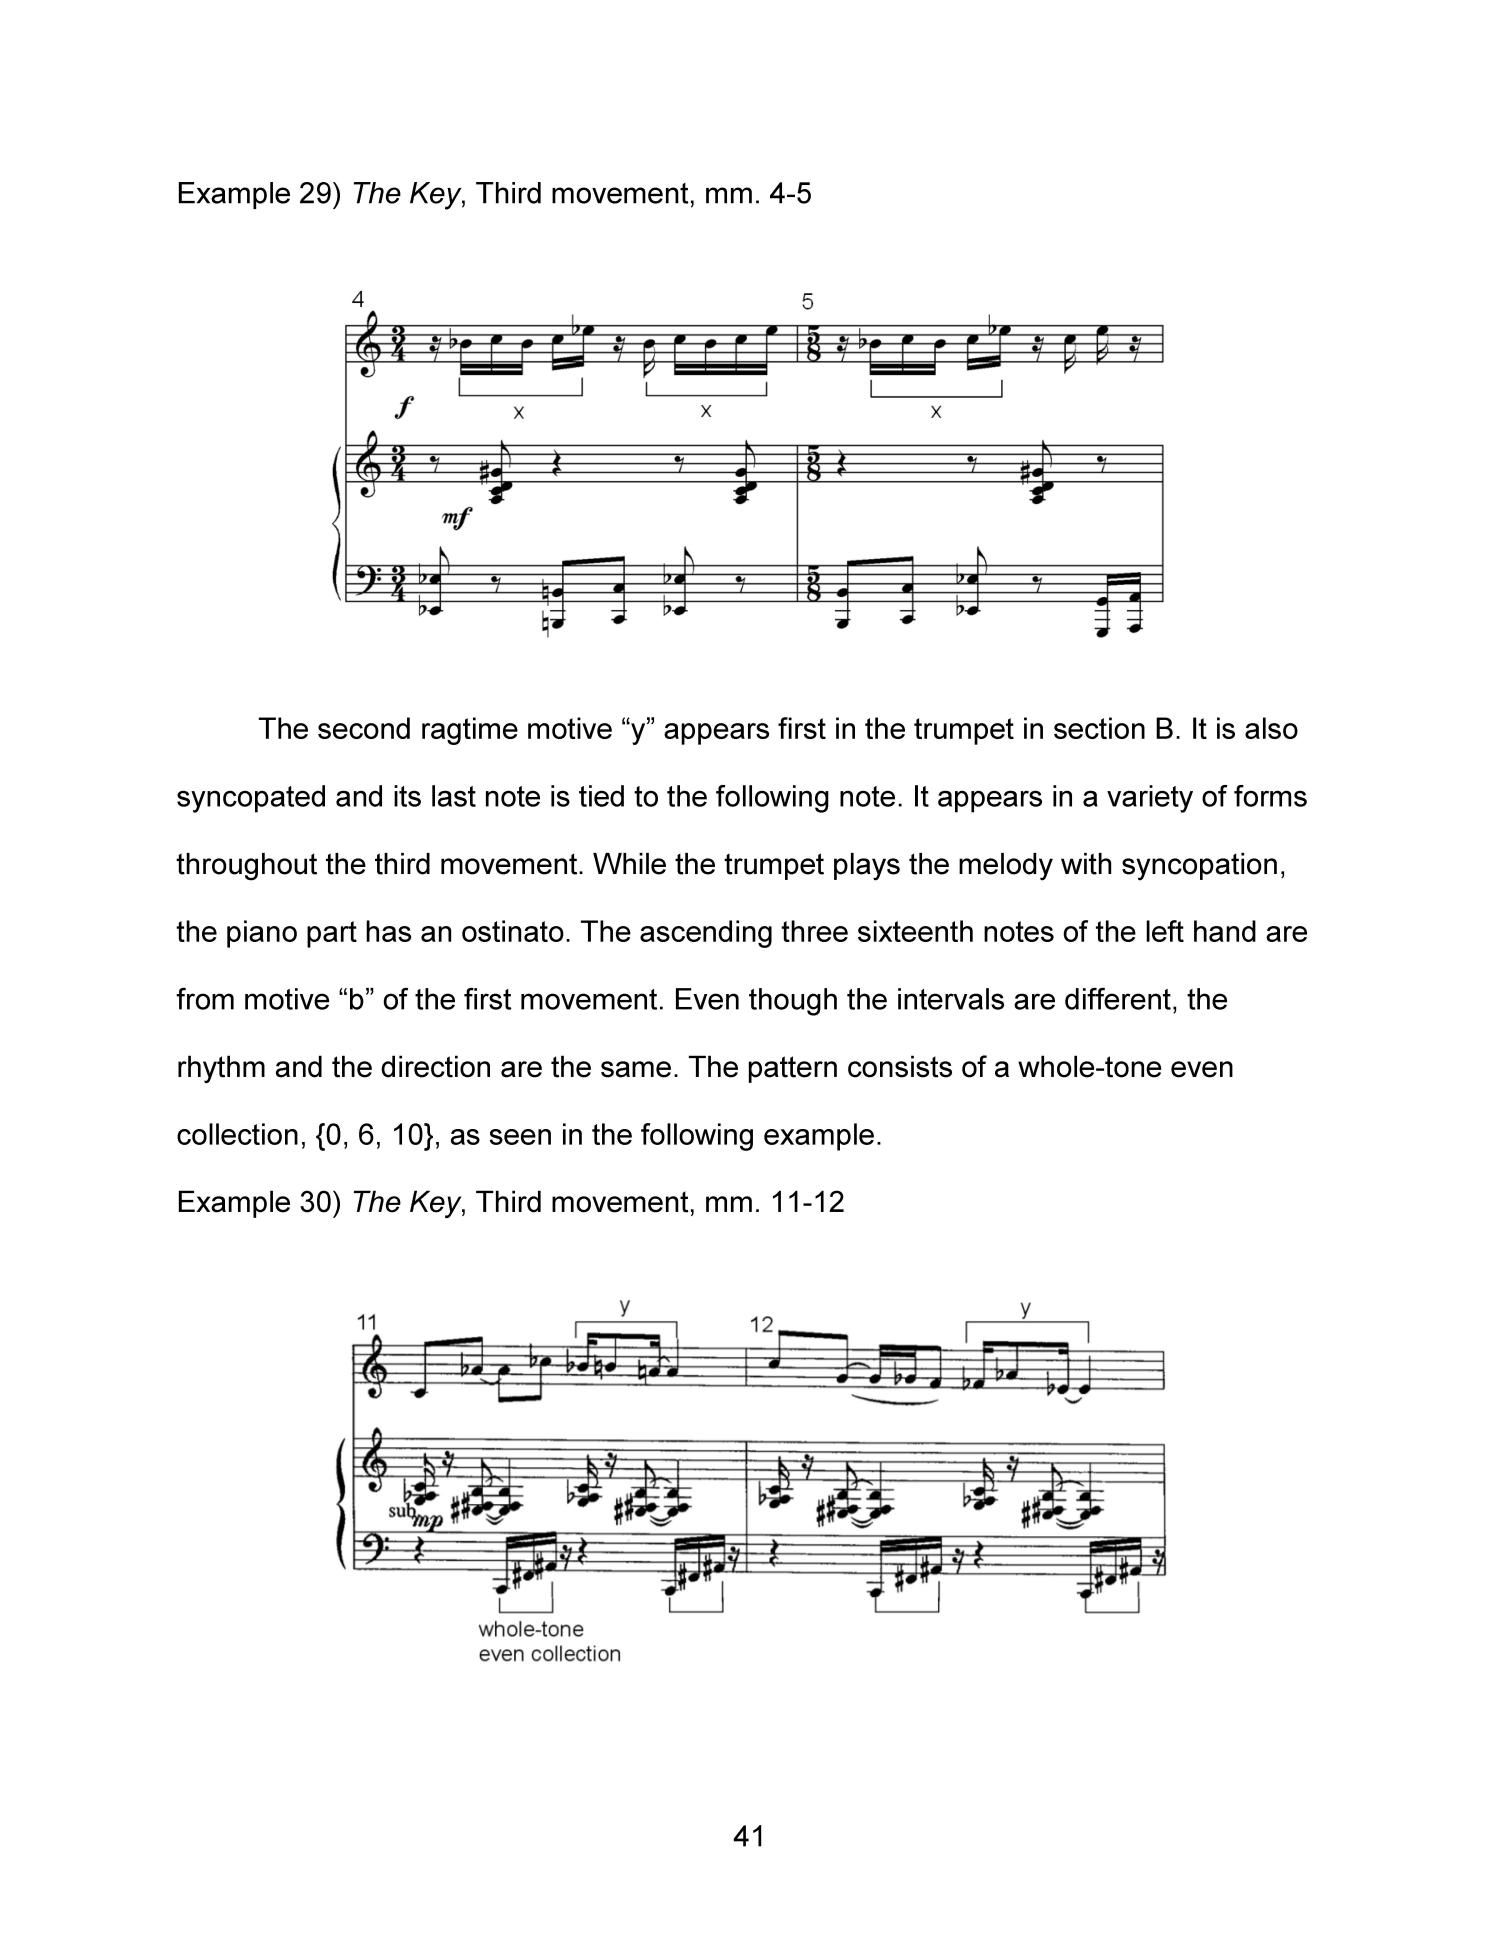 A Stylistic and Analytical Study of The Key for Trumpet and Piano by James Wintle
                                                
                                                    41
                                                